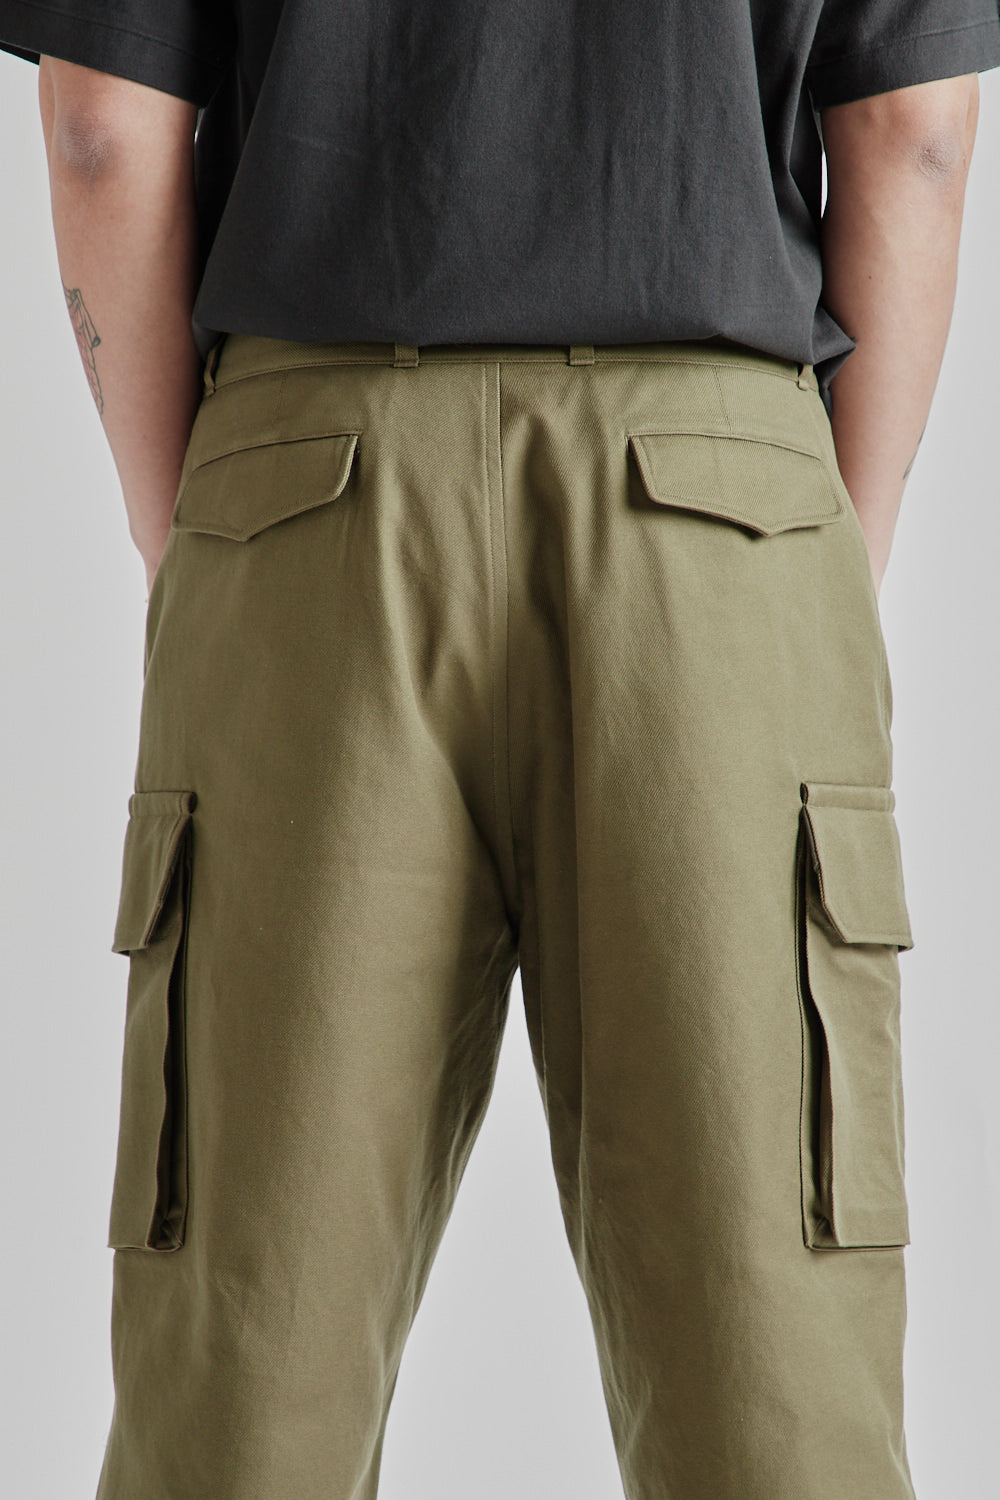 Blurhms Cotton Serge 47 Pants in Olive